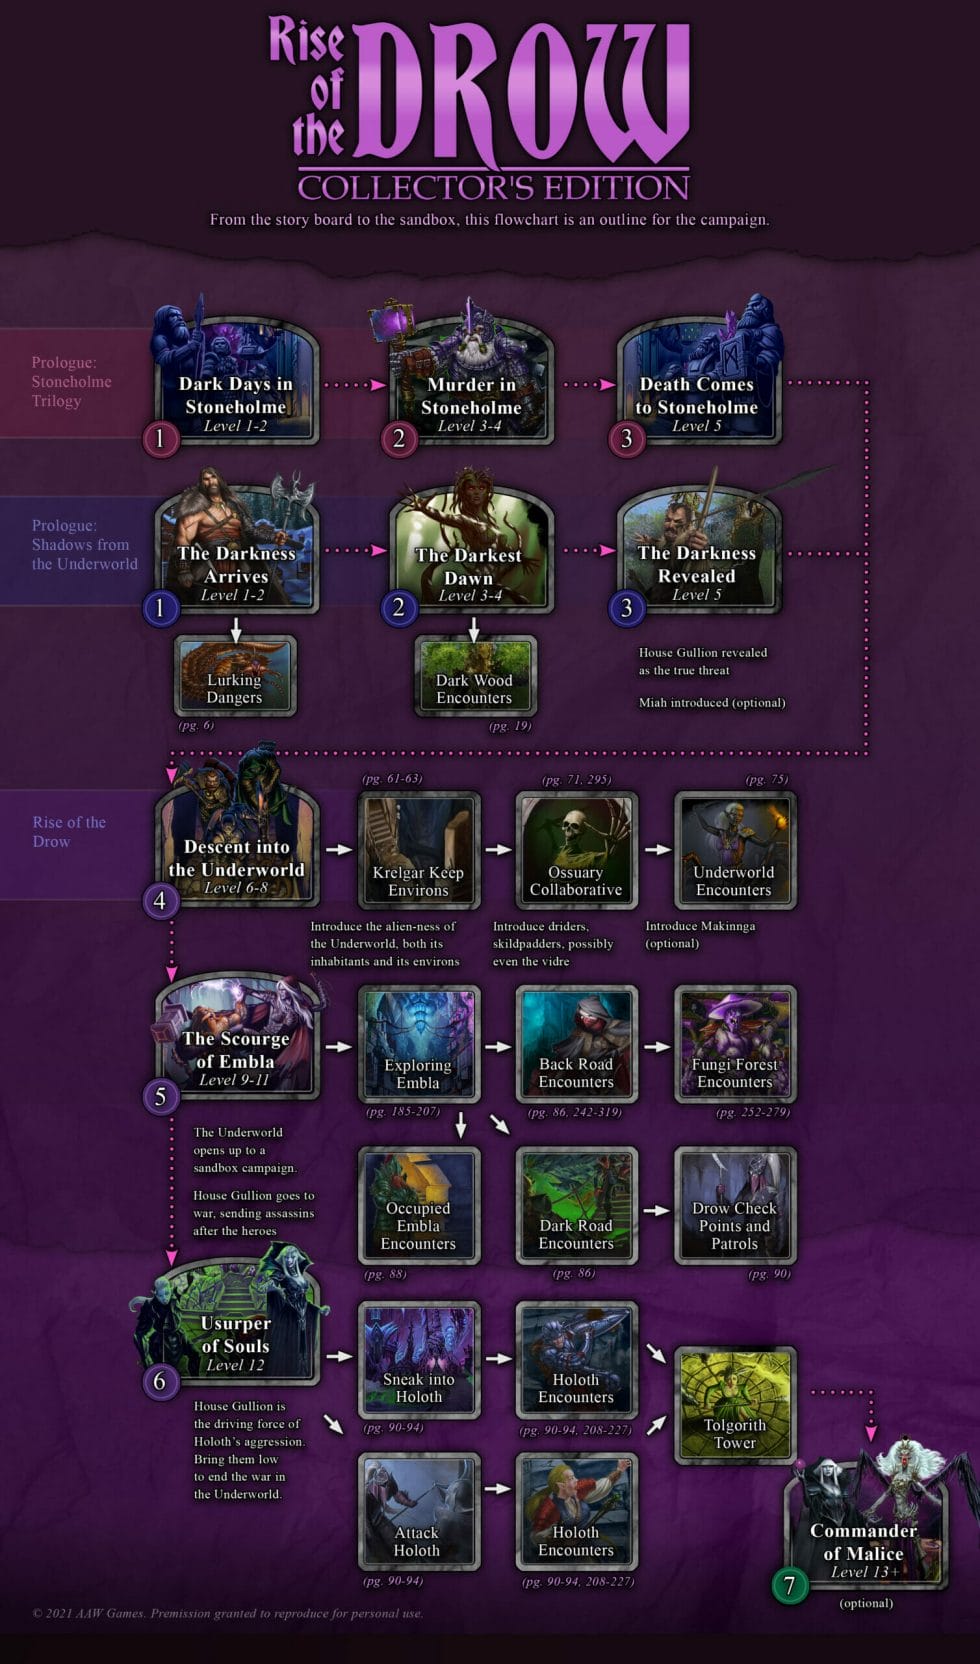 Rise of the Drow Flowchart